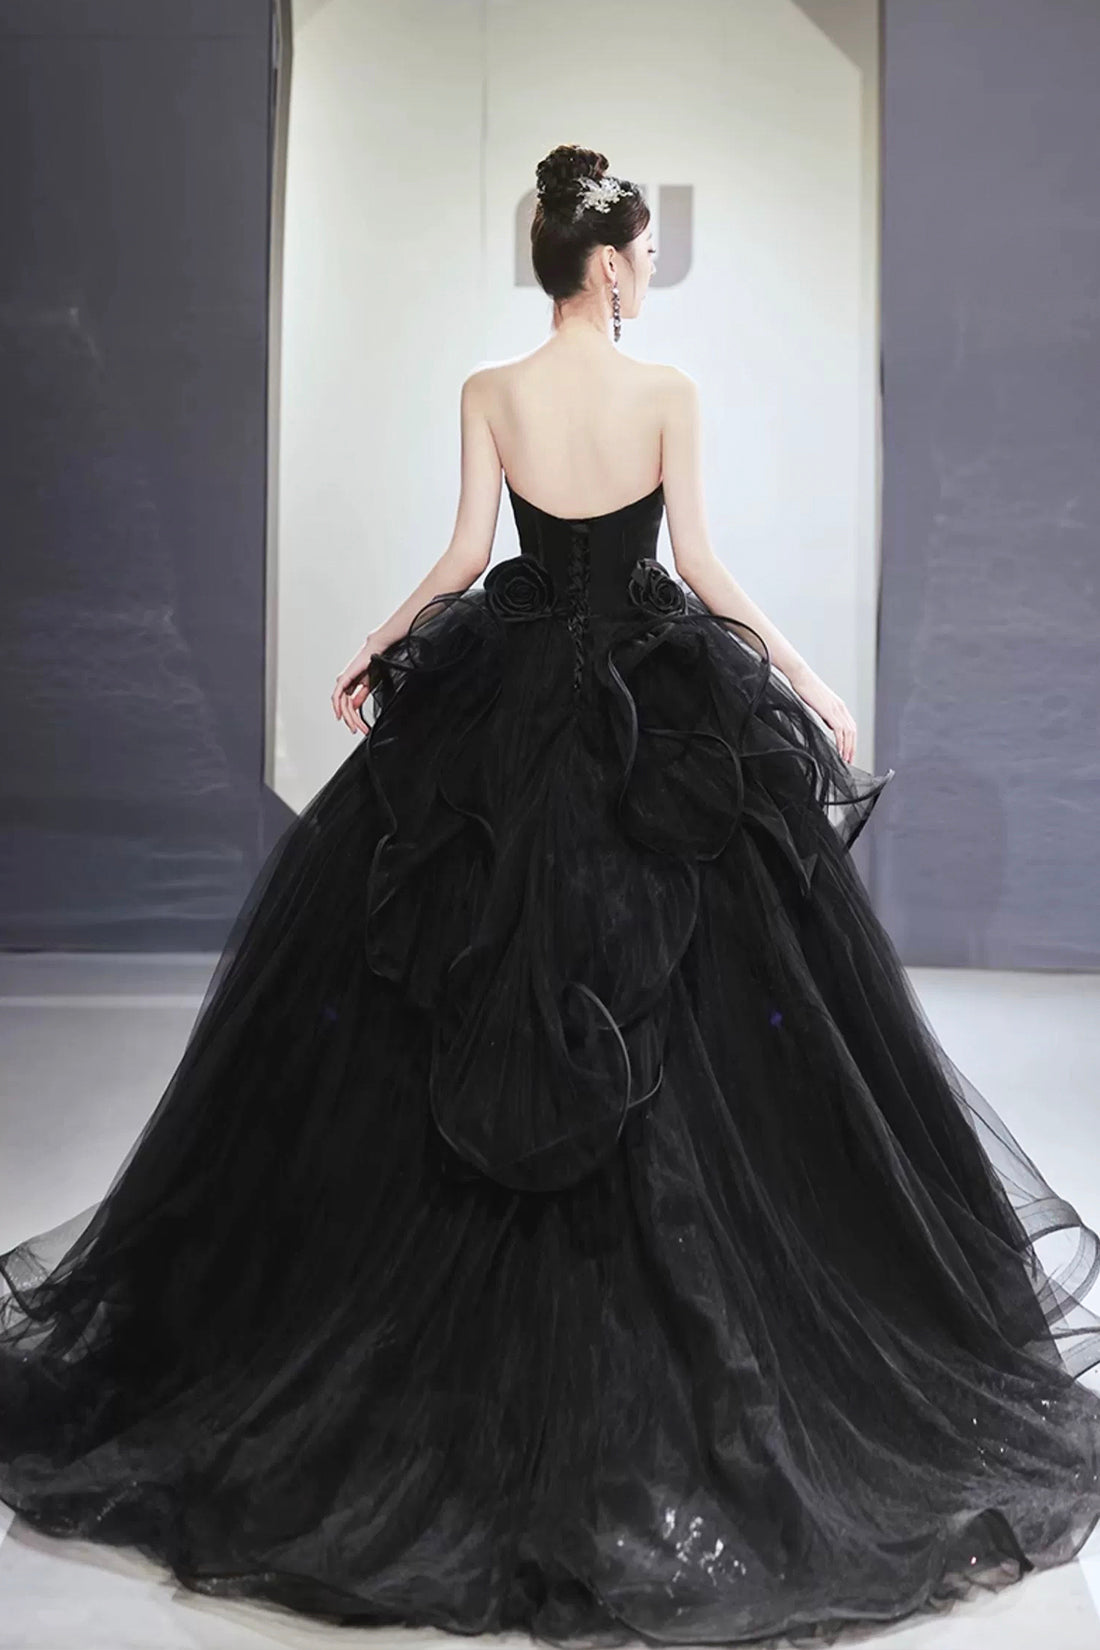 Black Tulle Beaded Long Ball Gown, A-Line Strapless Evening Formal Gown